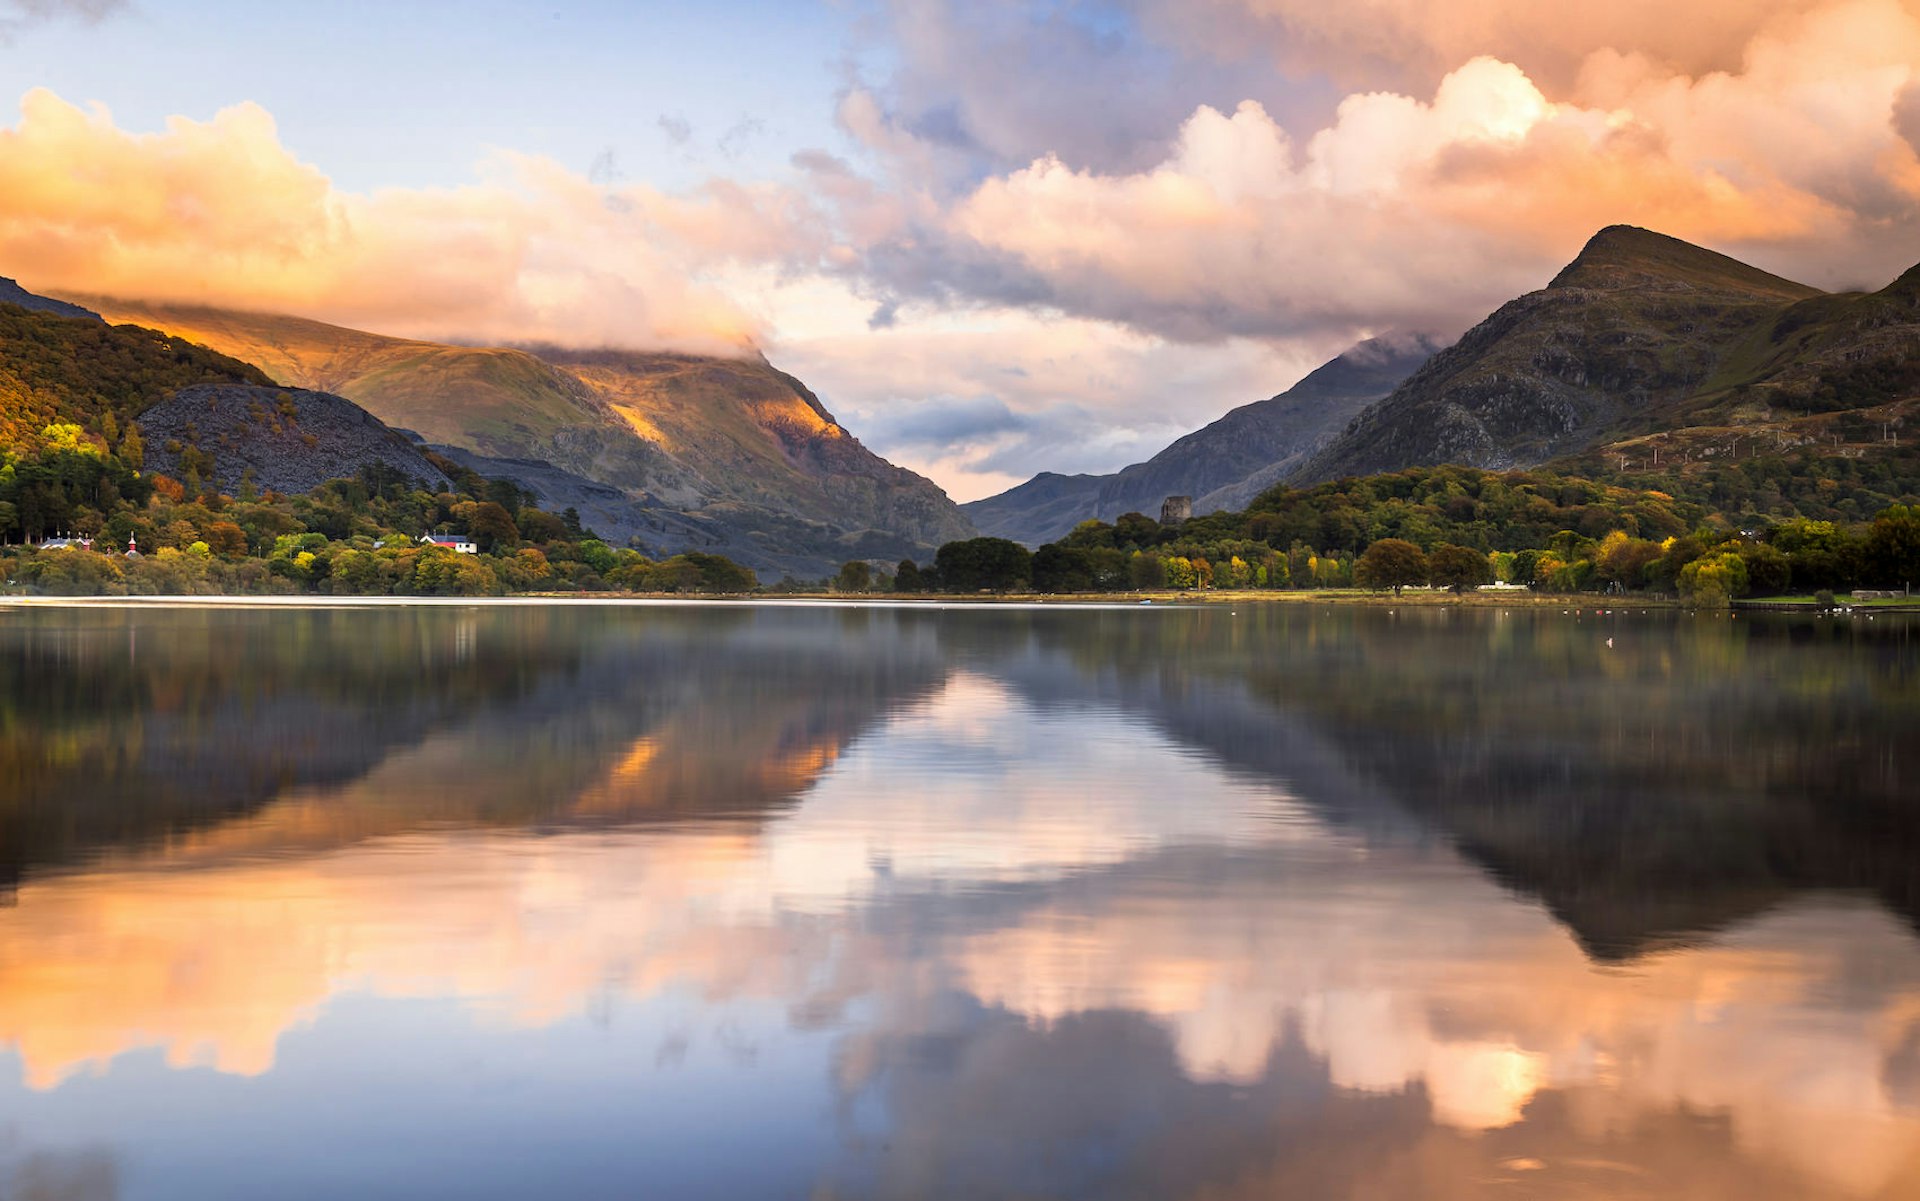 A sunset behind Snowdonia that is reflected in the still water of lake in the foreground.